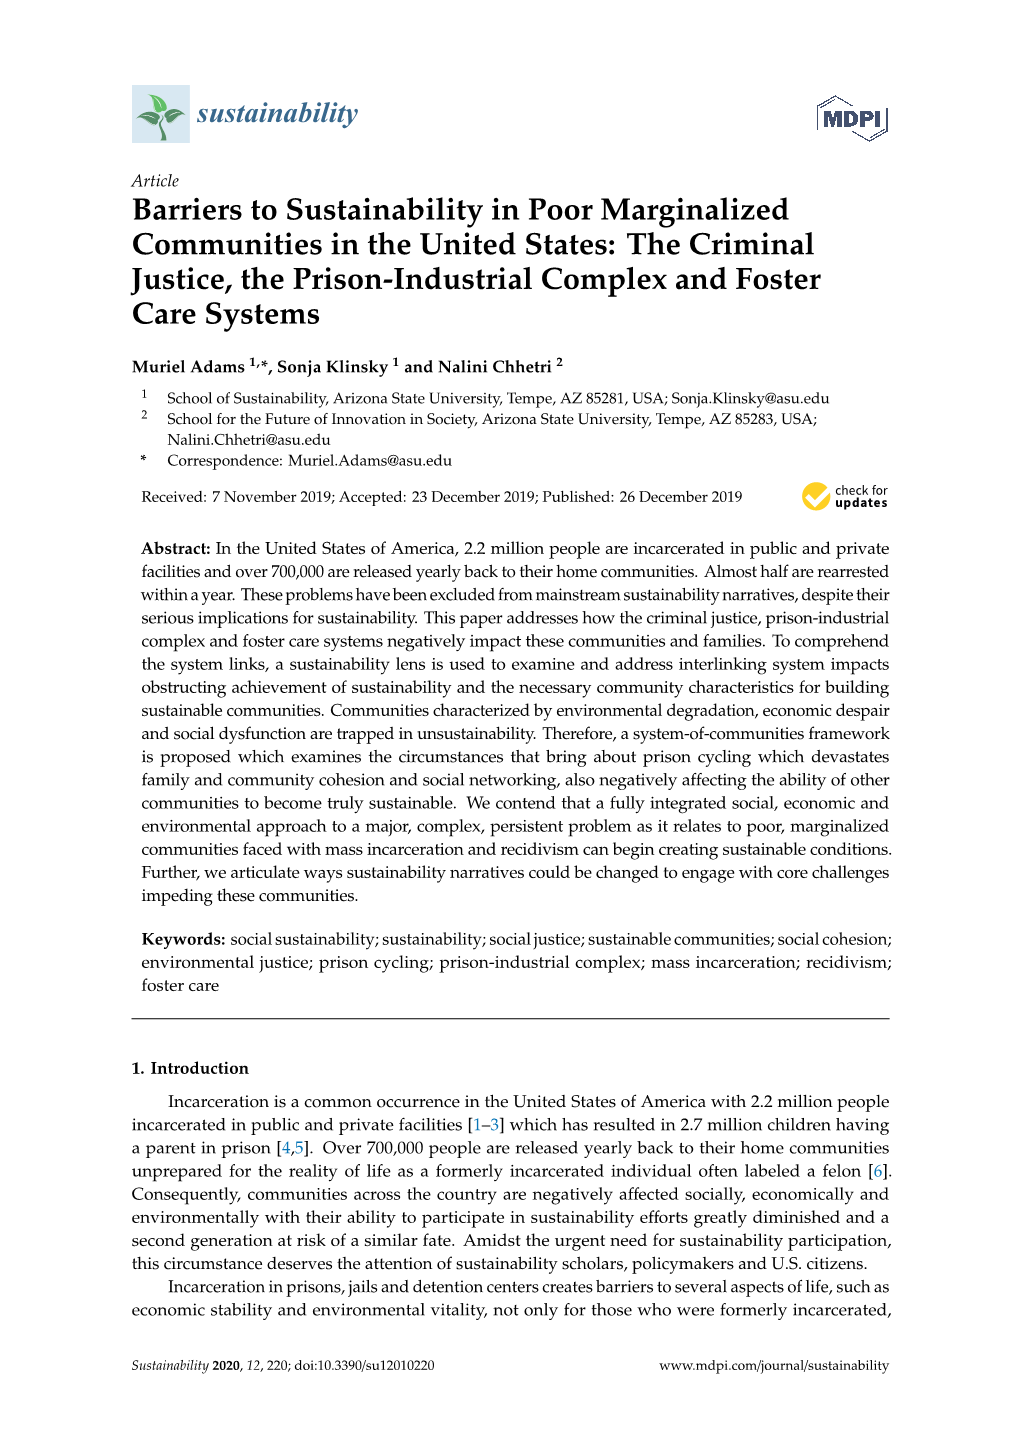 Barriers to Sustainability in Poor Marginalized Communities in the United States: the Criminal Justice, the Prison-Industrial Complex and Foster Care Systems